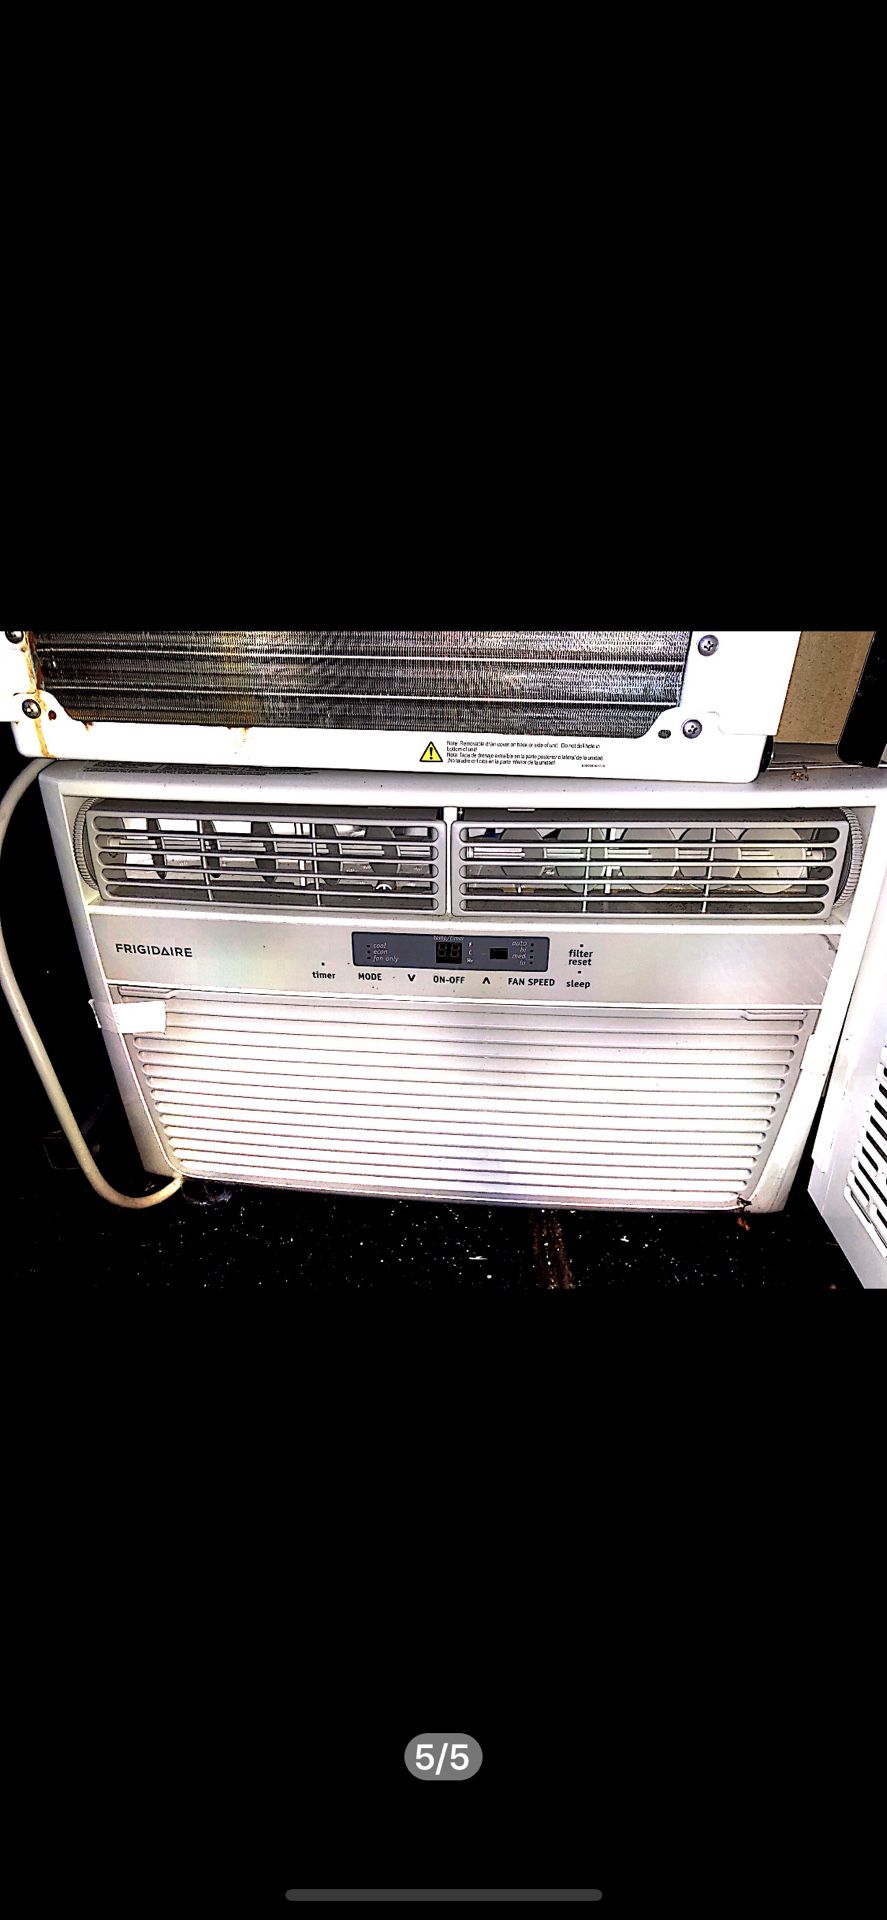 2 window type AC Aircon for 100 Dollars